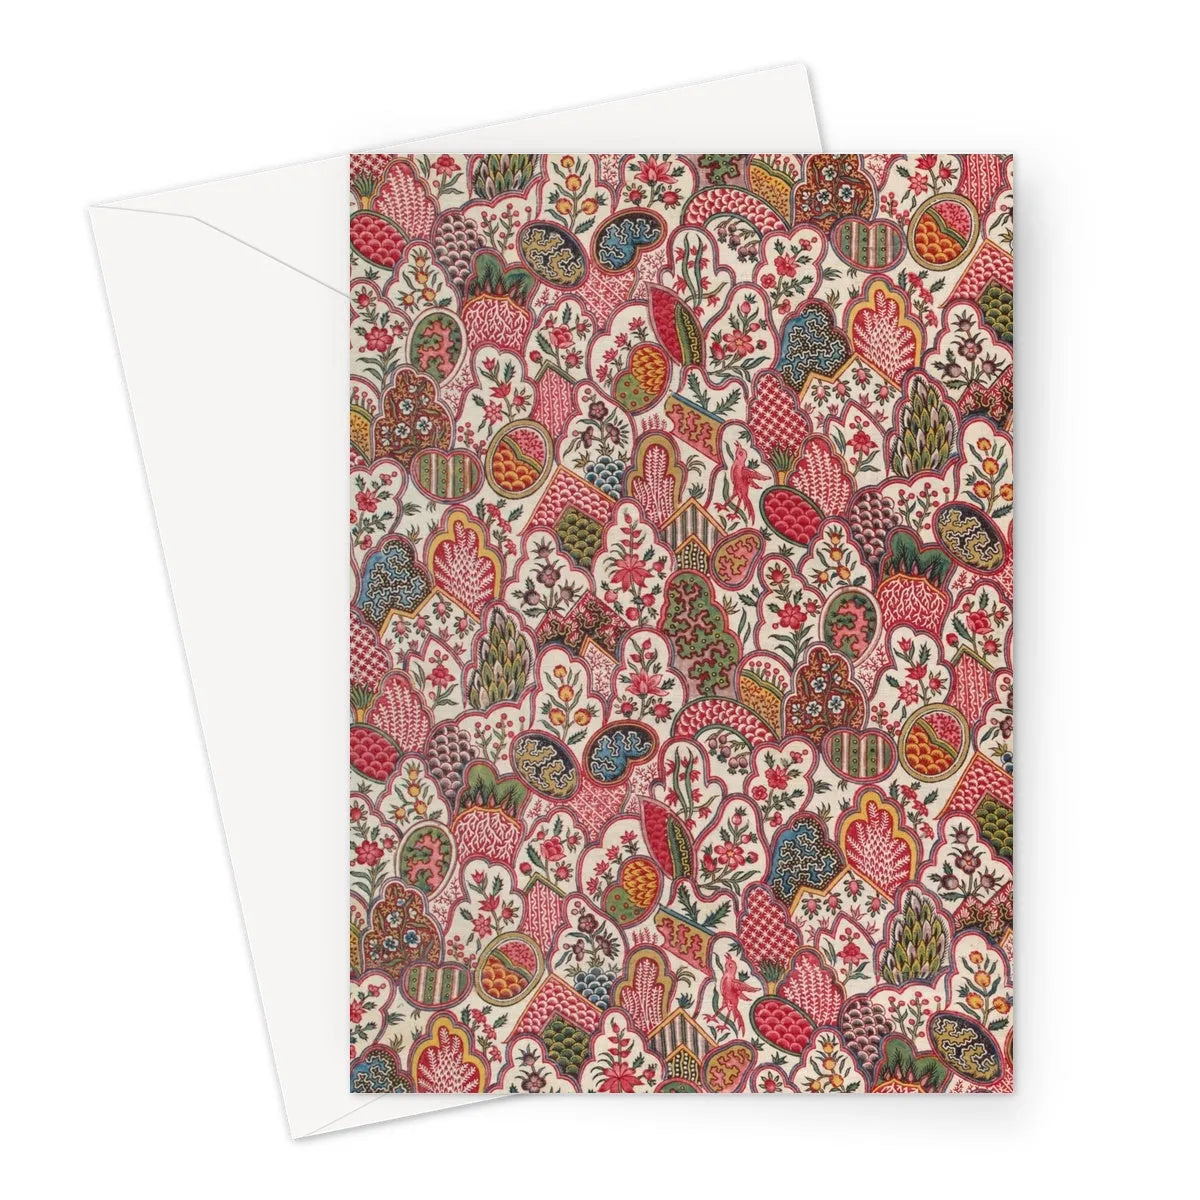 Vintage Floral Pattern Fabric Greeting Card - A5 Portrait / 1 Card - Notebooks & Notepads - Aesthetic Art